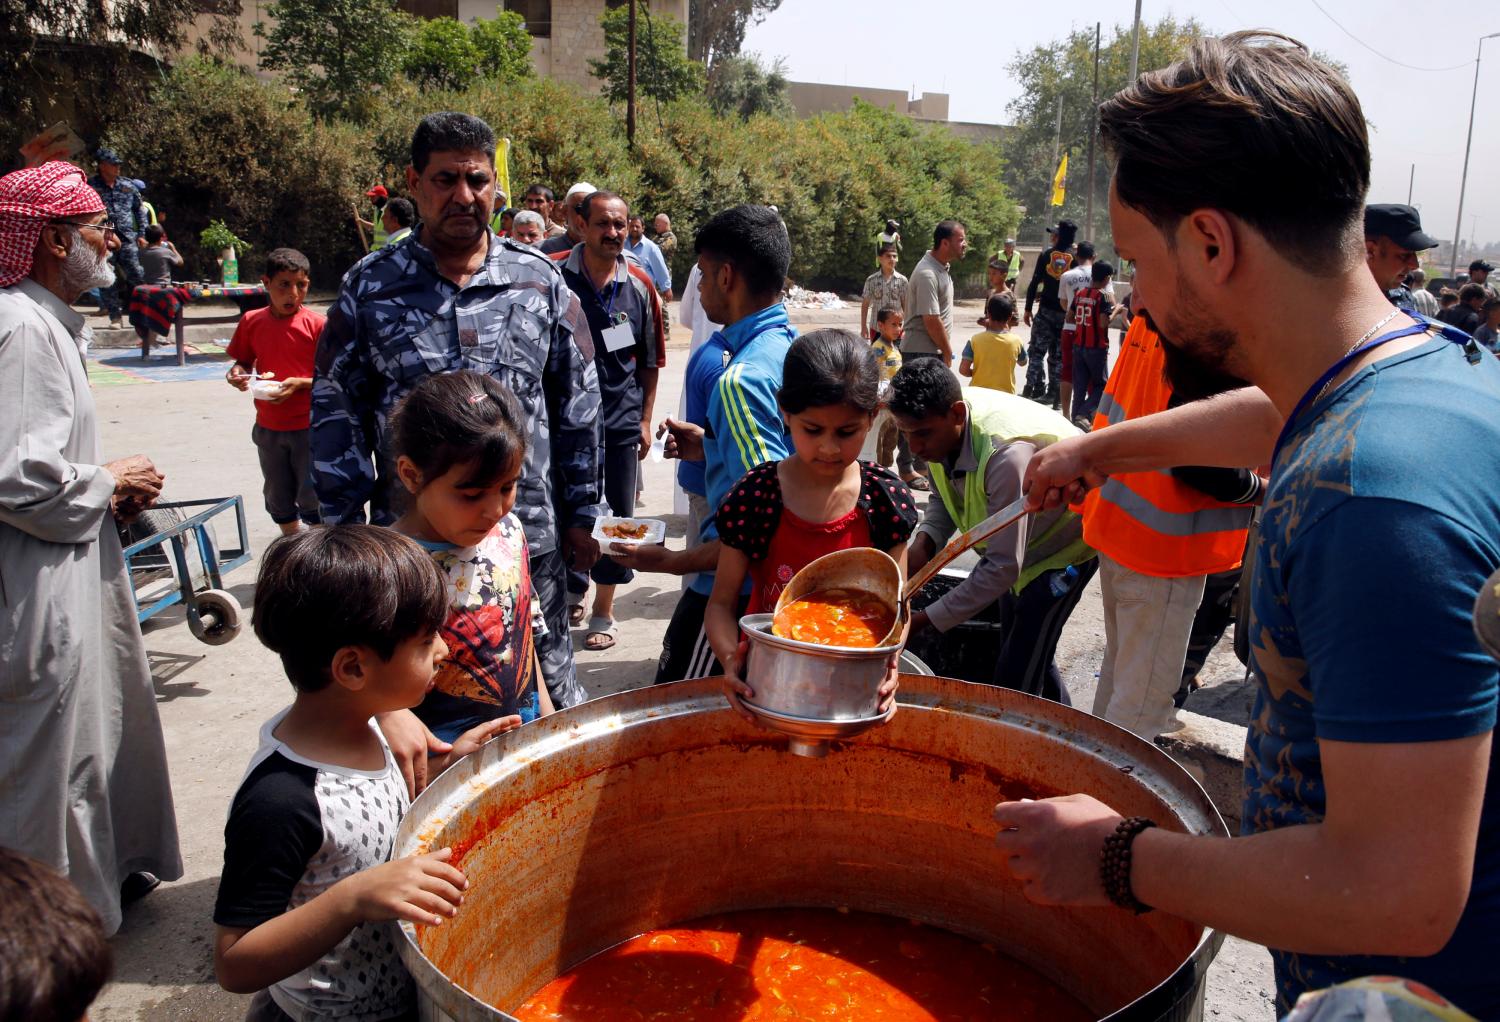 Residents receive food at a distribution point after the end of the battles between the Iraqi forces and Islamic State militants at Tayaran district in western Mosul